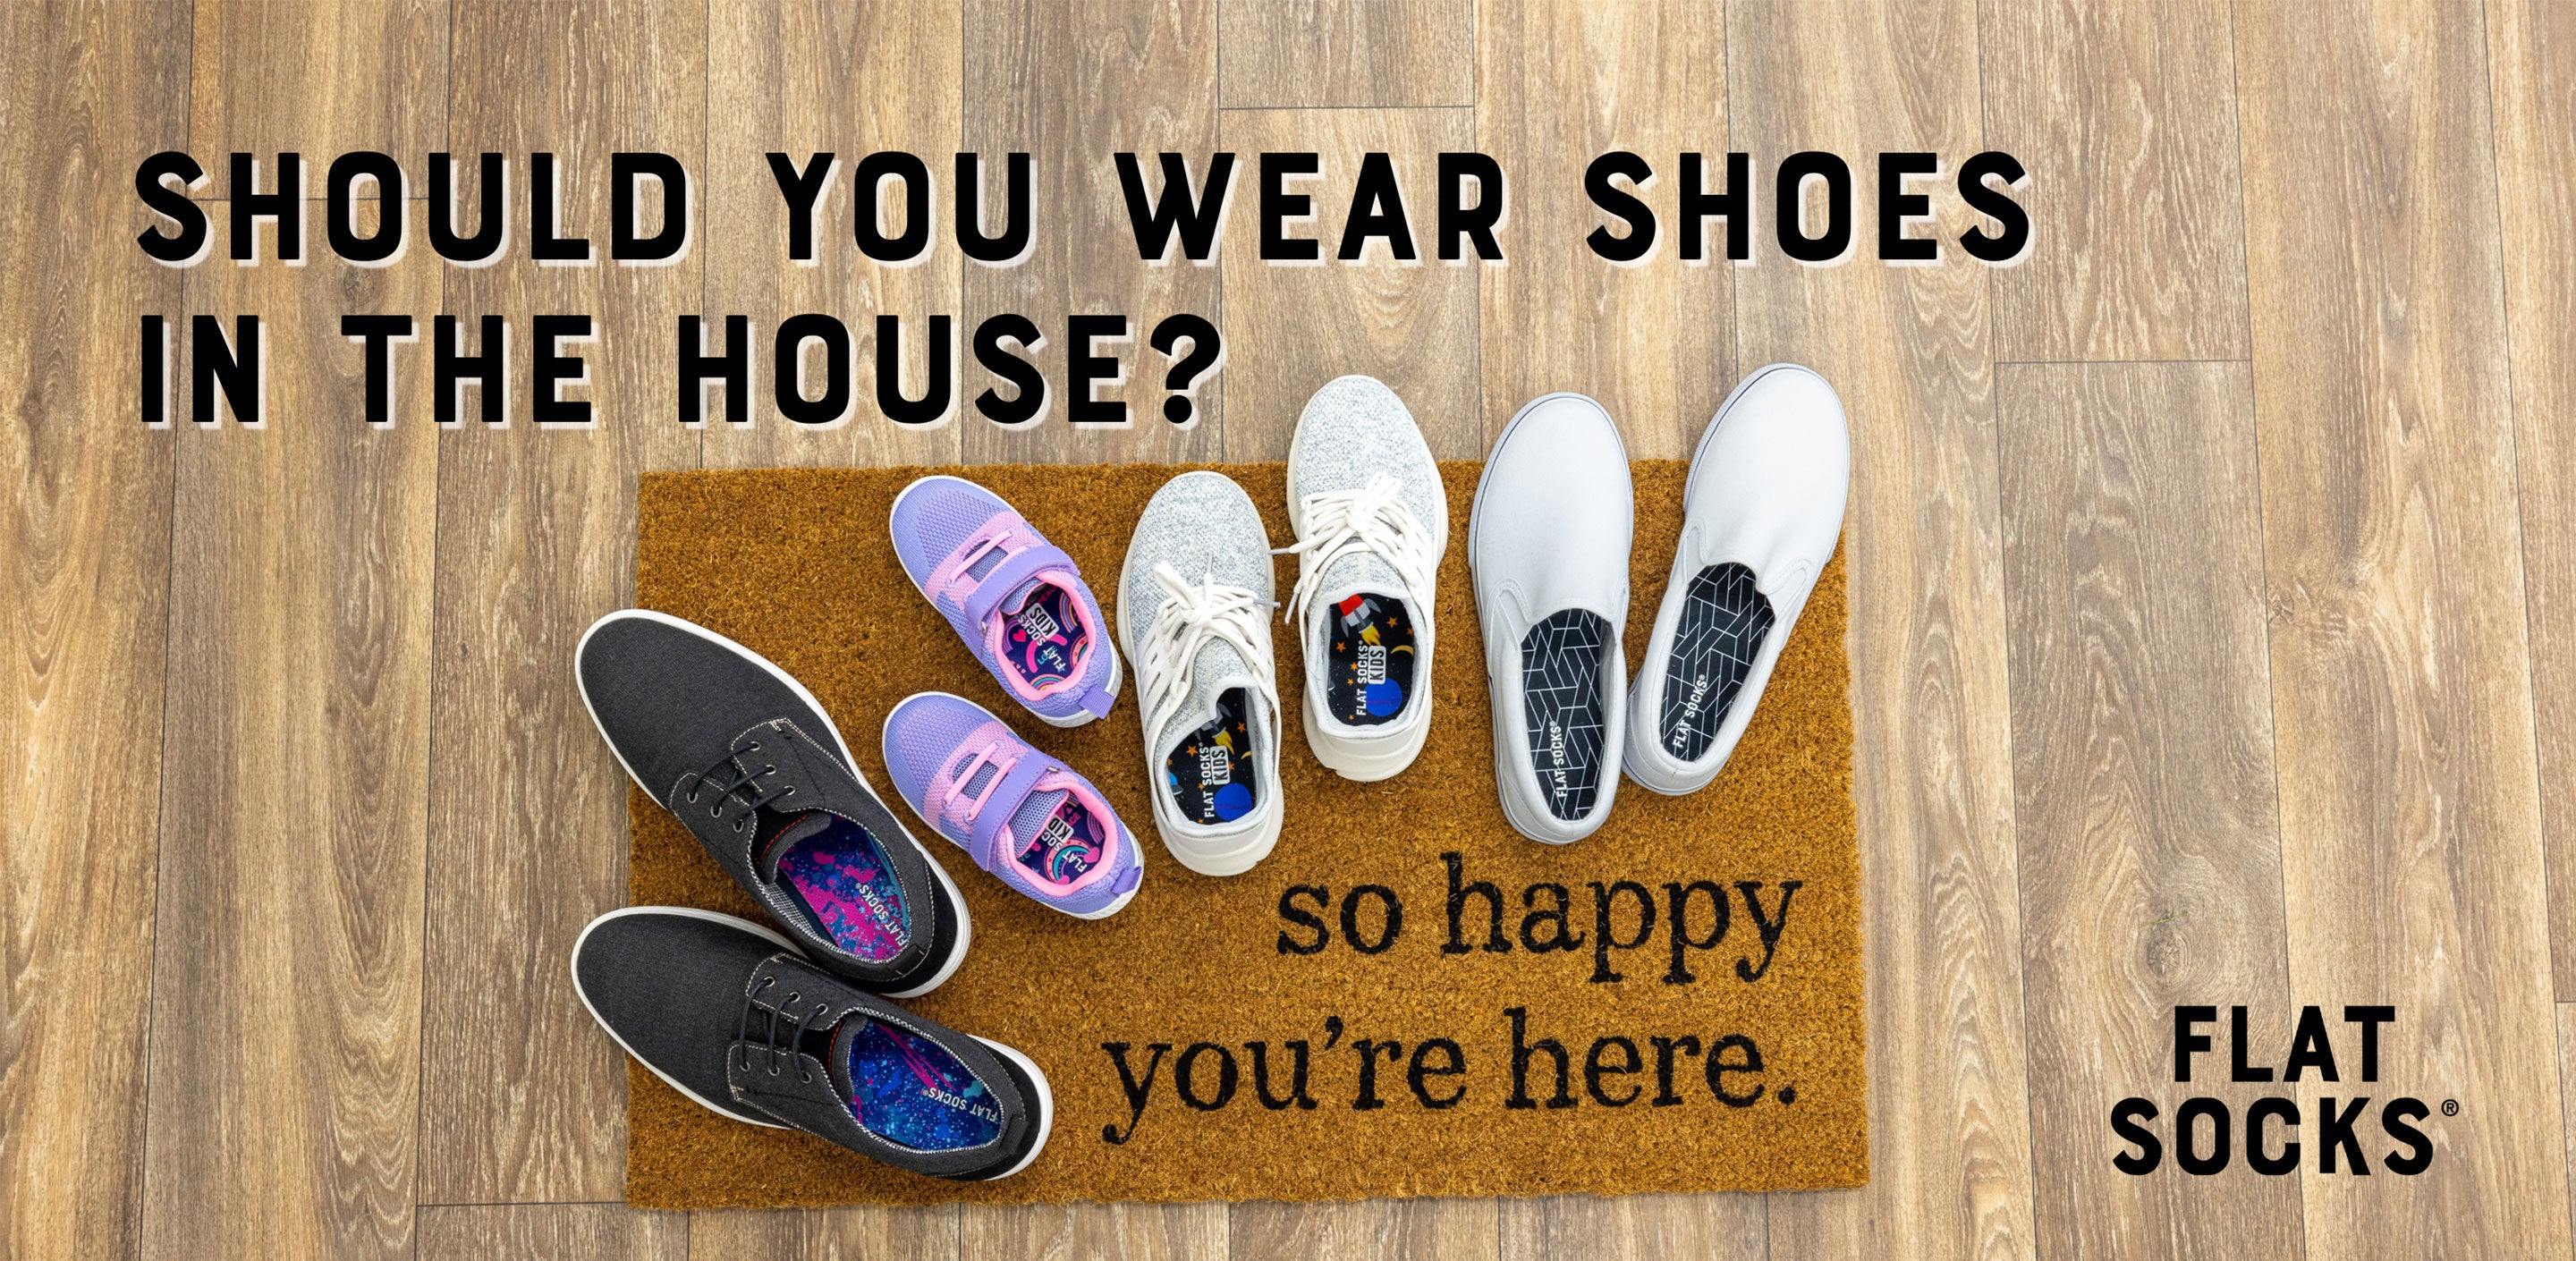 Most Americans are shoes off at home — CBS News poll - CBS News